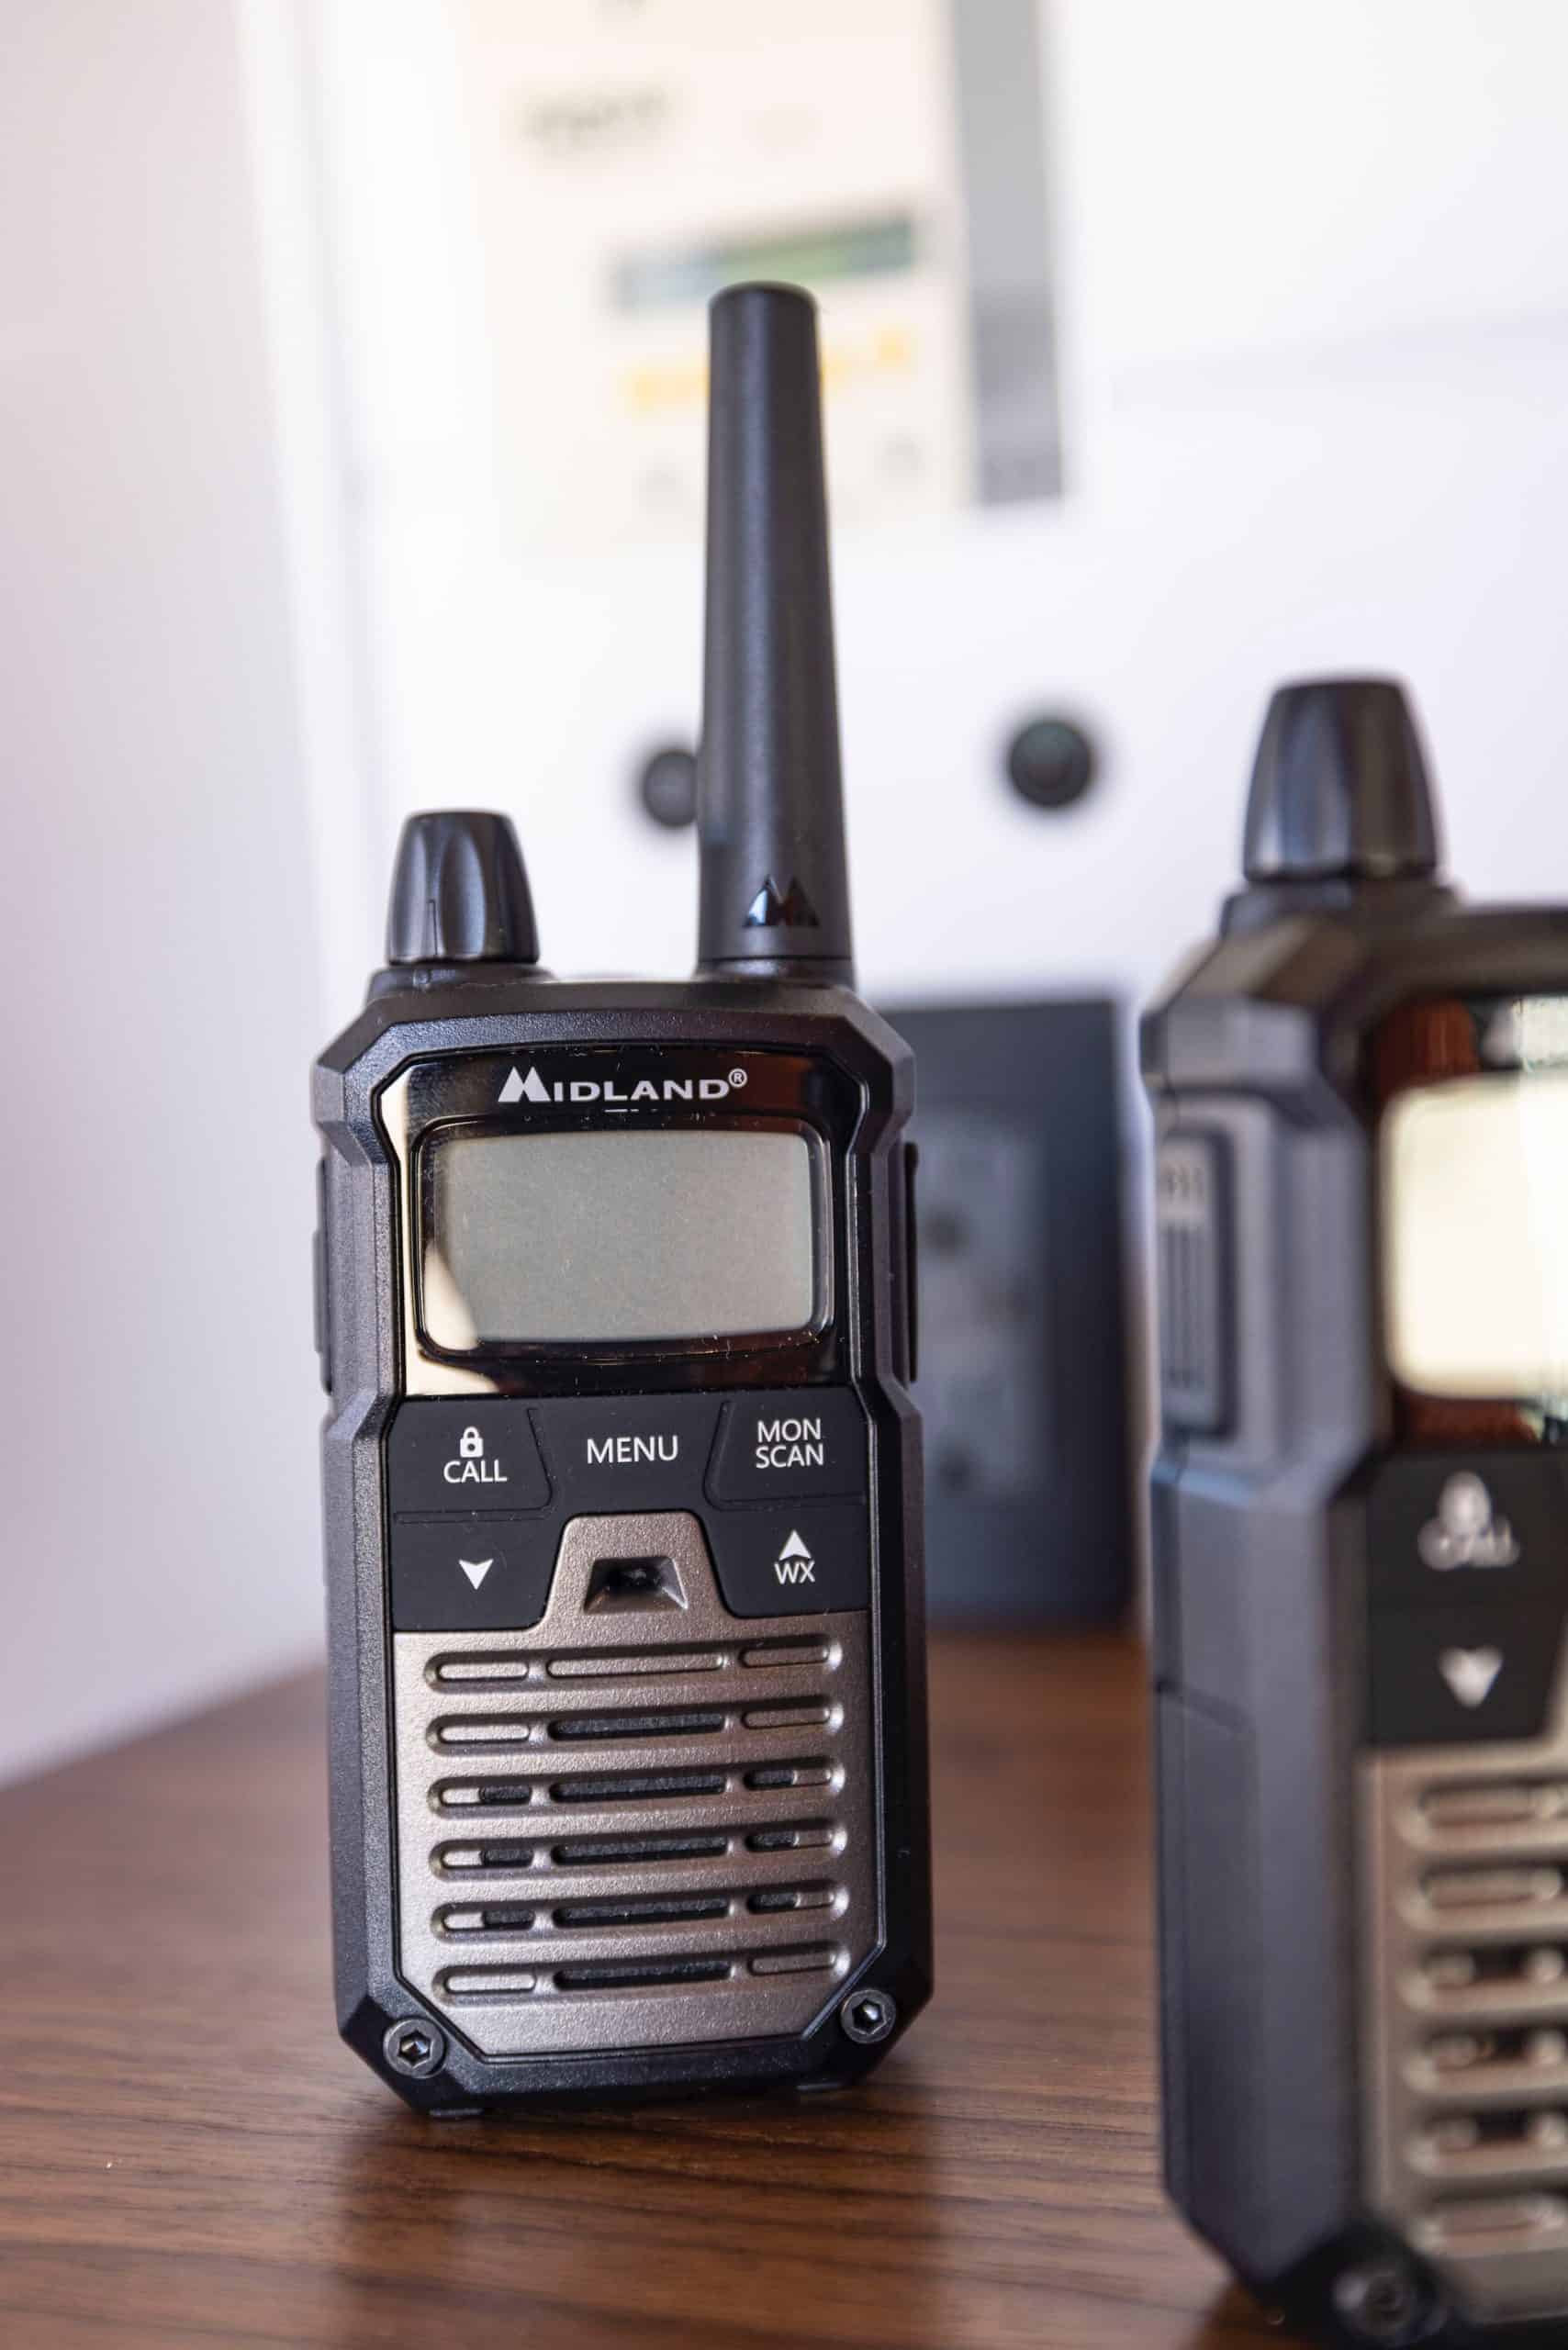 Contemporary Use of Radios: A Tool for Emergency Services